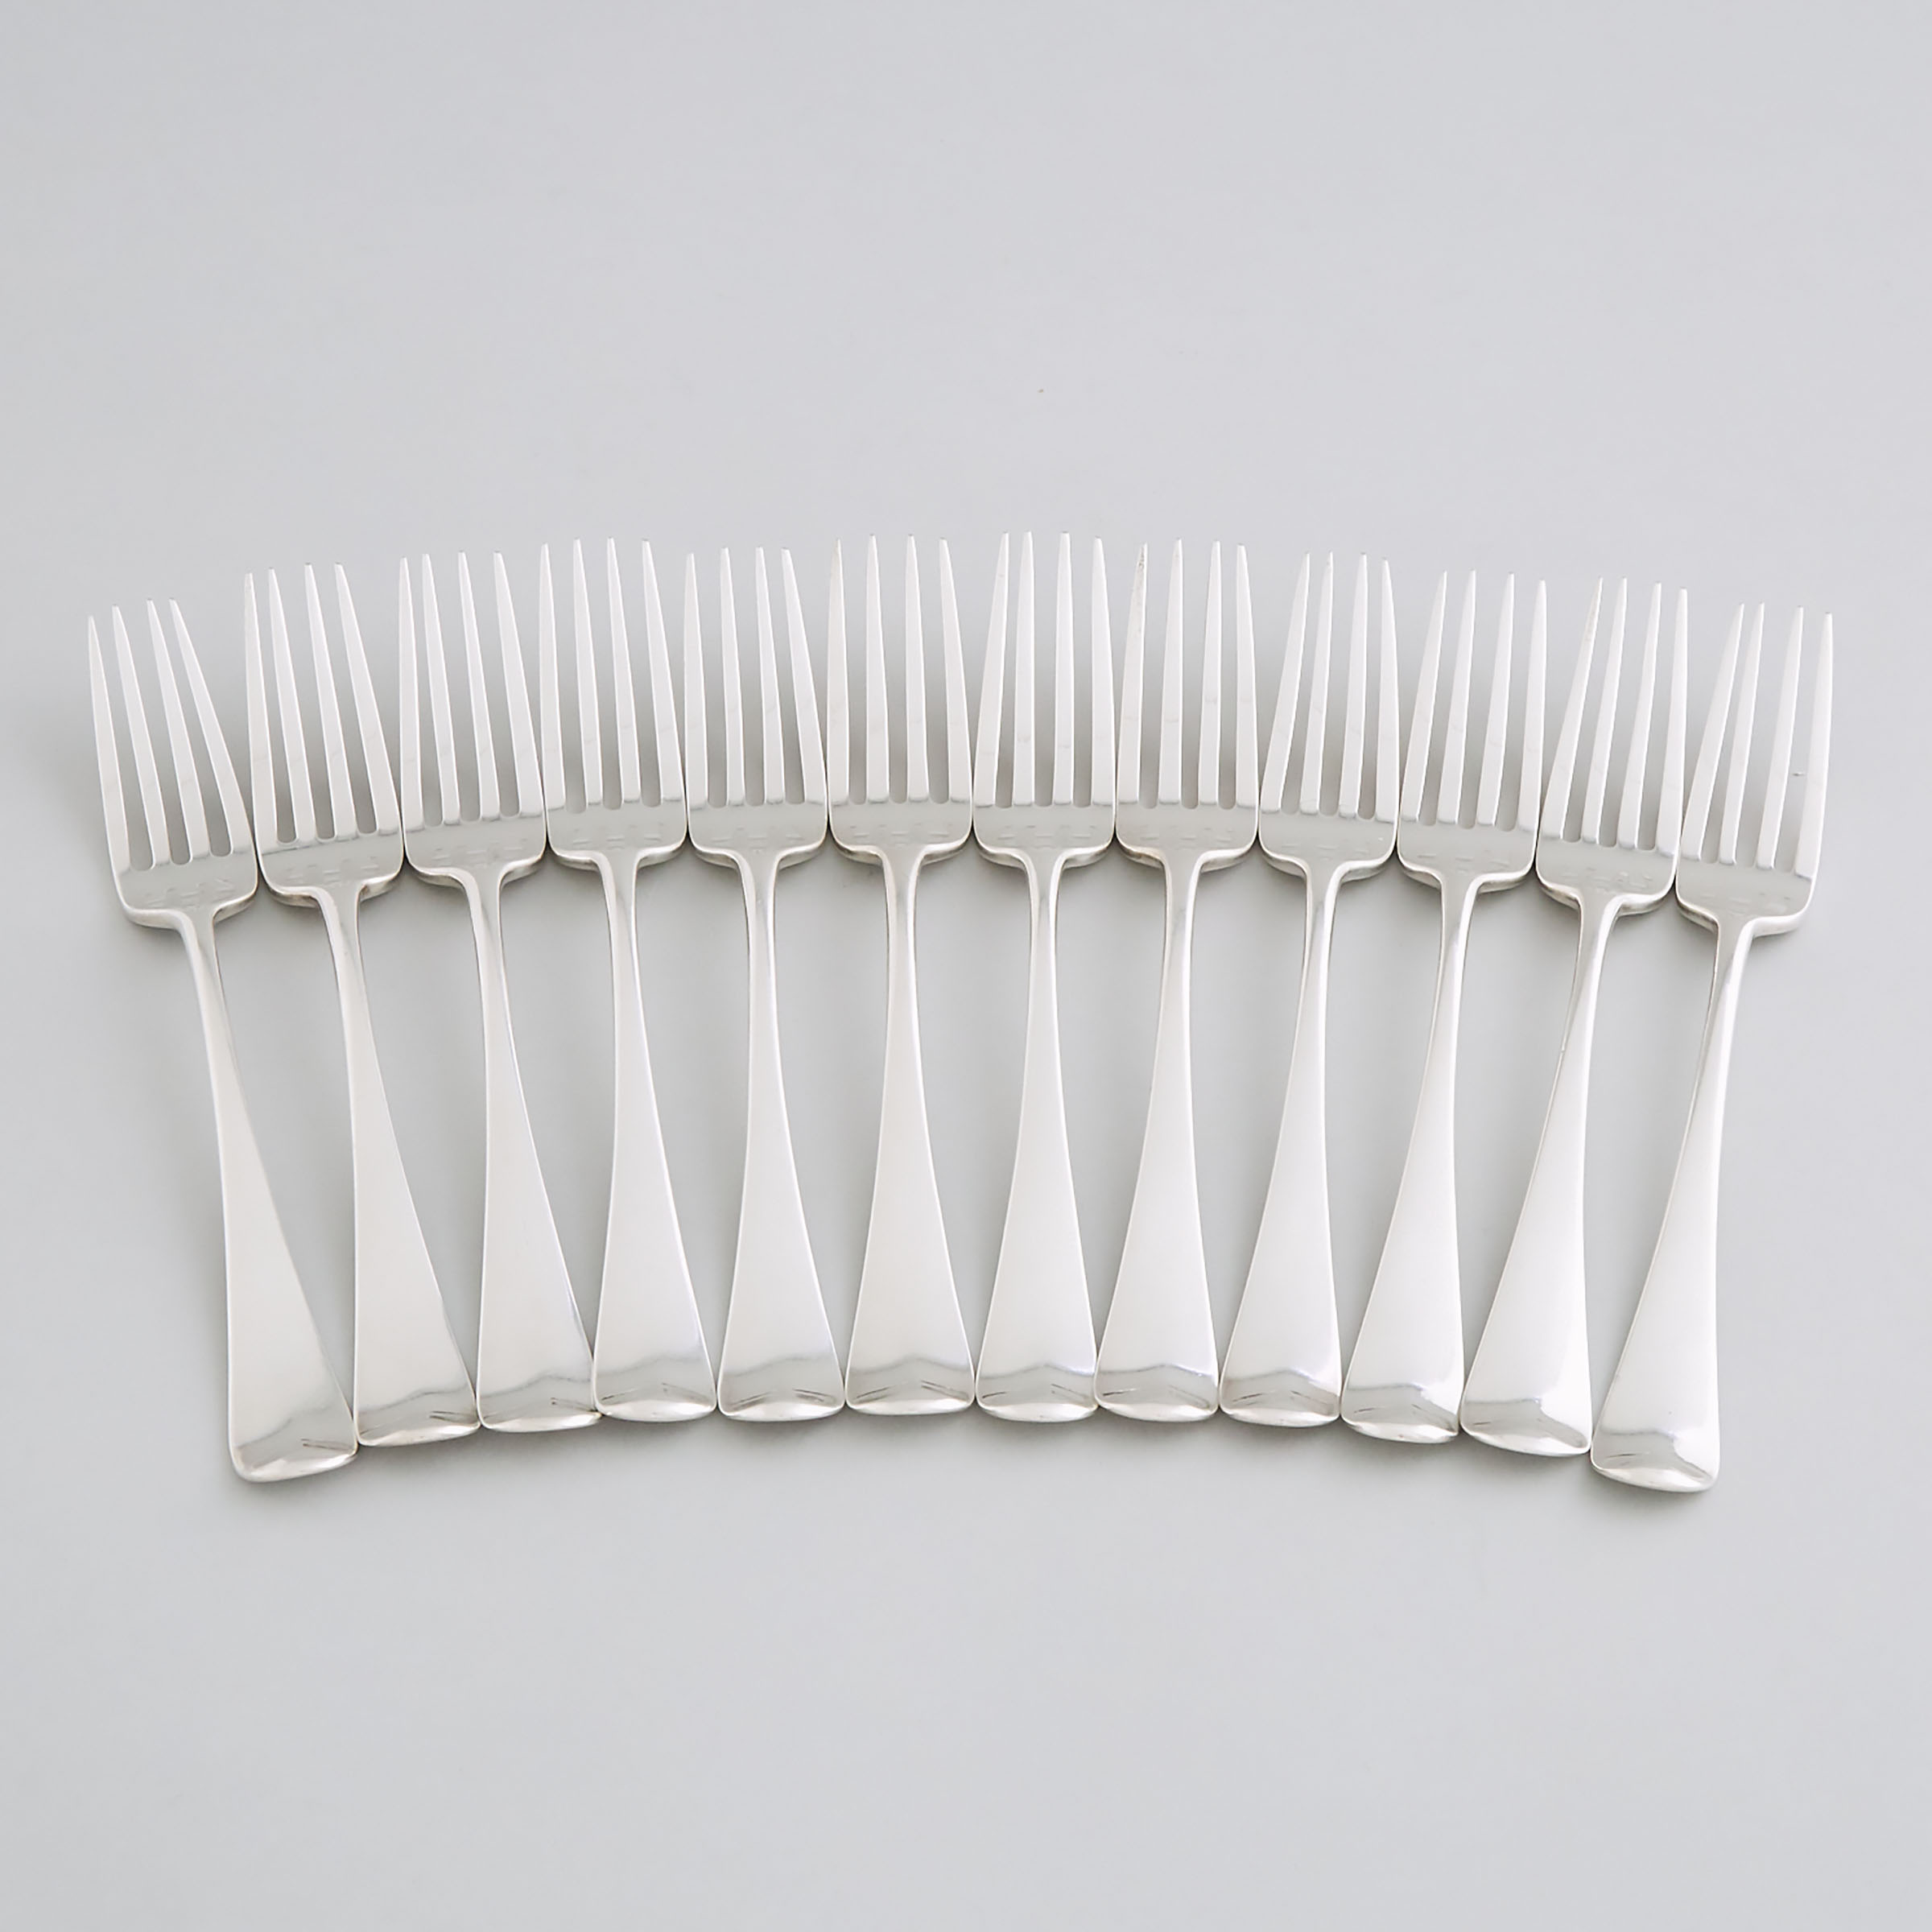 Set of Twelve George III Silver Old English Pattern Table Forks, George Smith & William Fearn, London, 1794